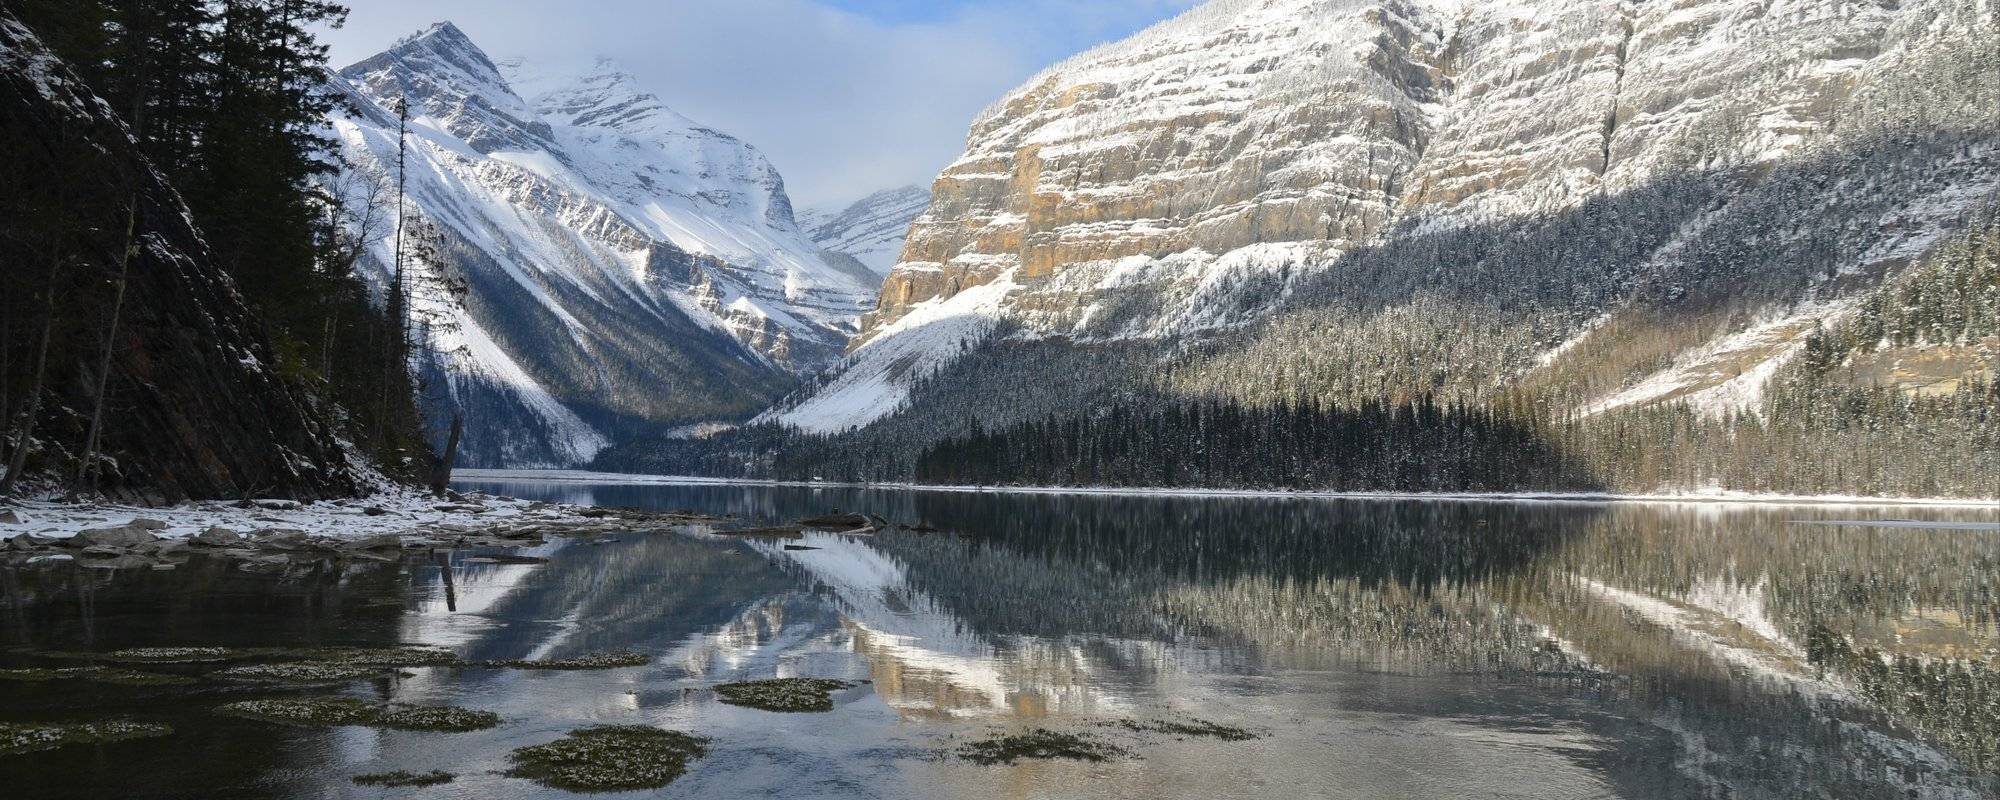 Canadian Rockies: The Mount Robson of my dreams